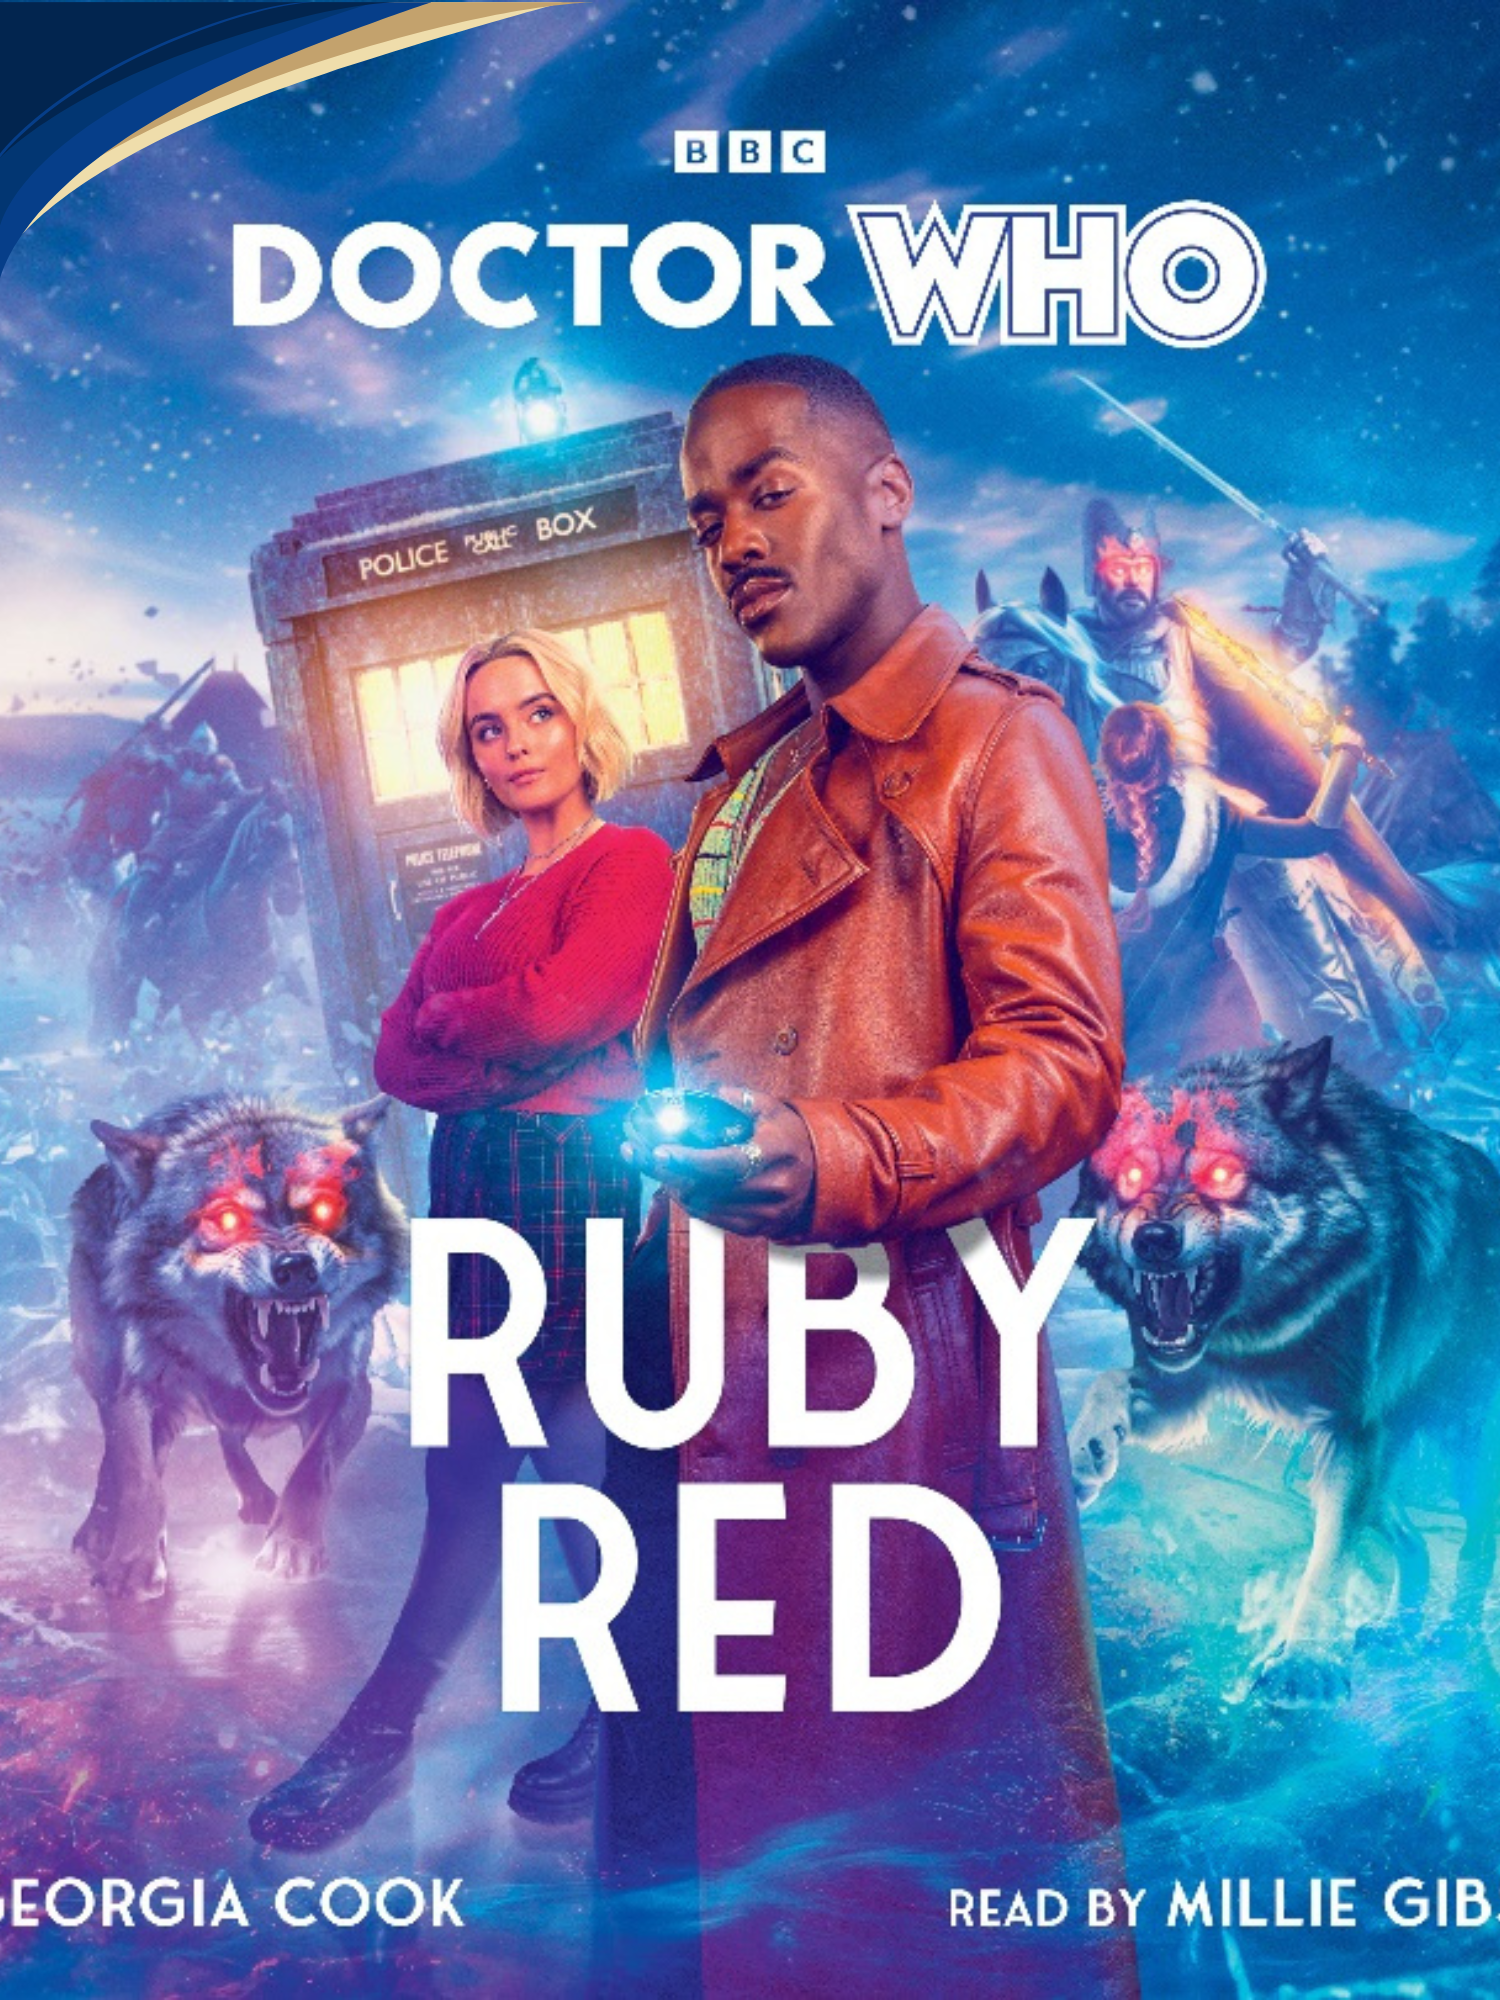 Doctor Who: Ruby Red, by Georgia Cook (book)